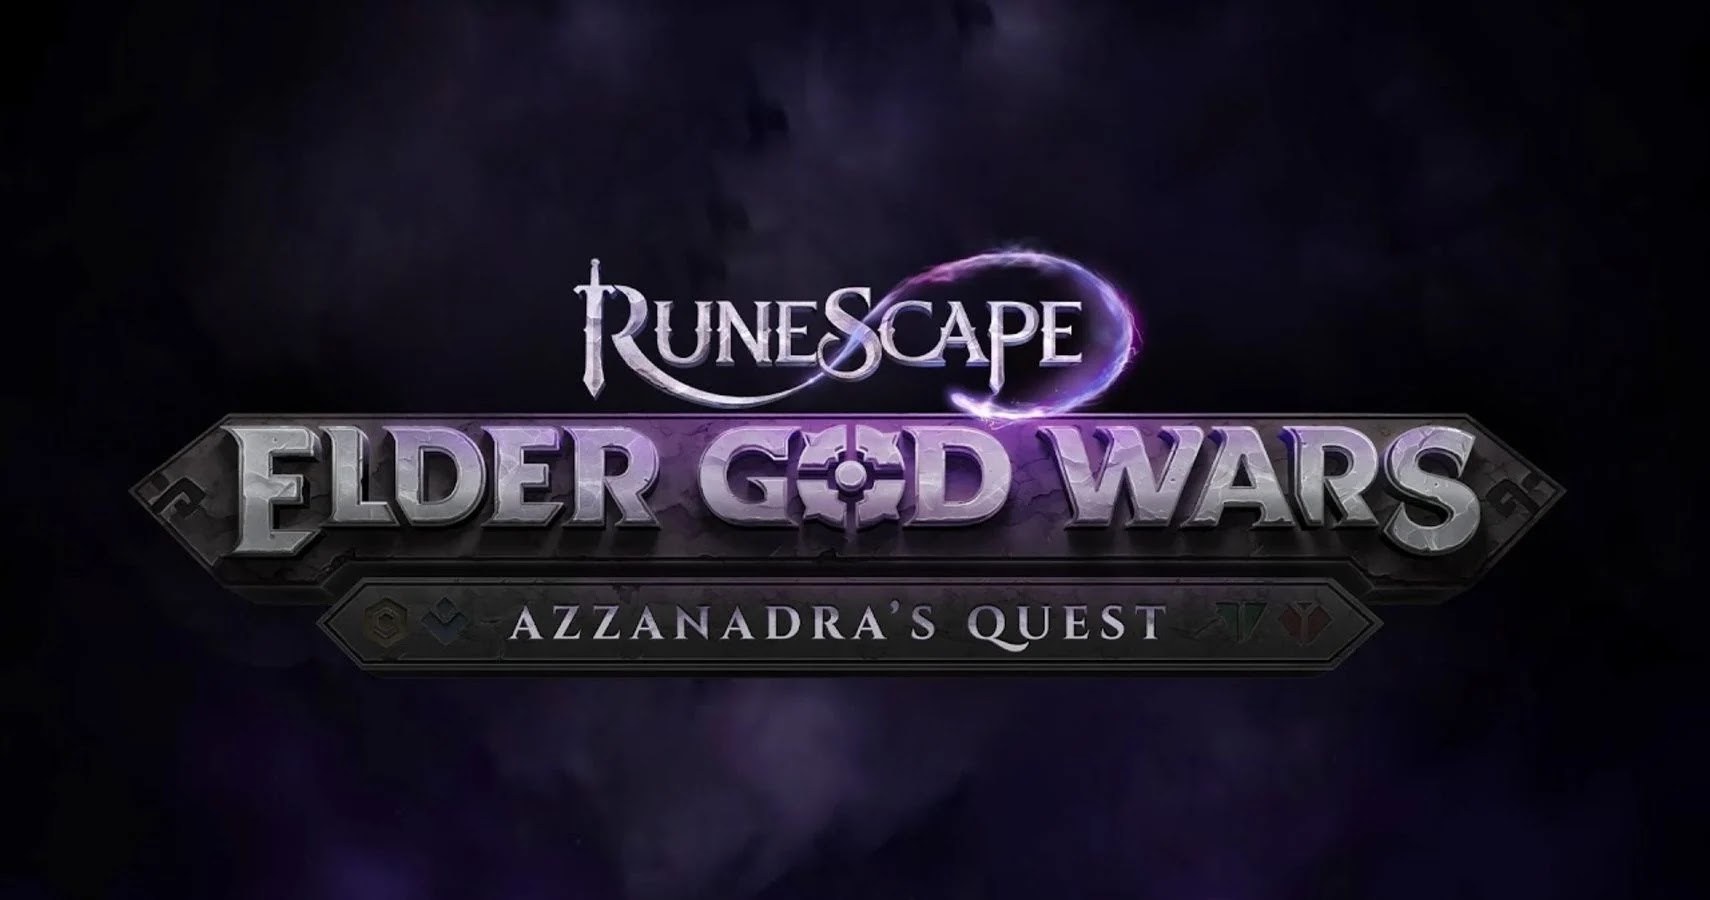 RuneScape’s Elder God Wars: The Nodon Front brings war as players battle to save Gielinor from the army of Jas, and it’s live today!